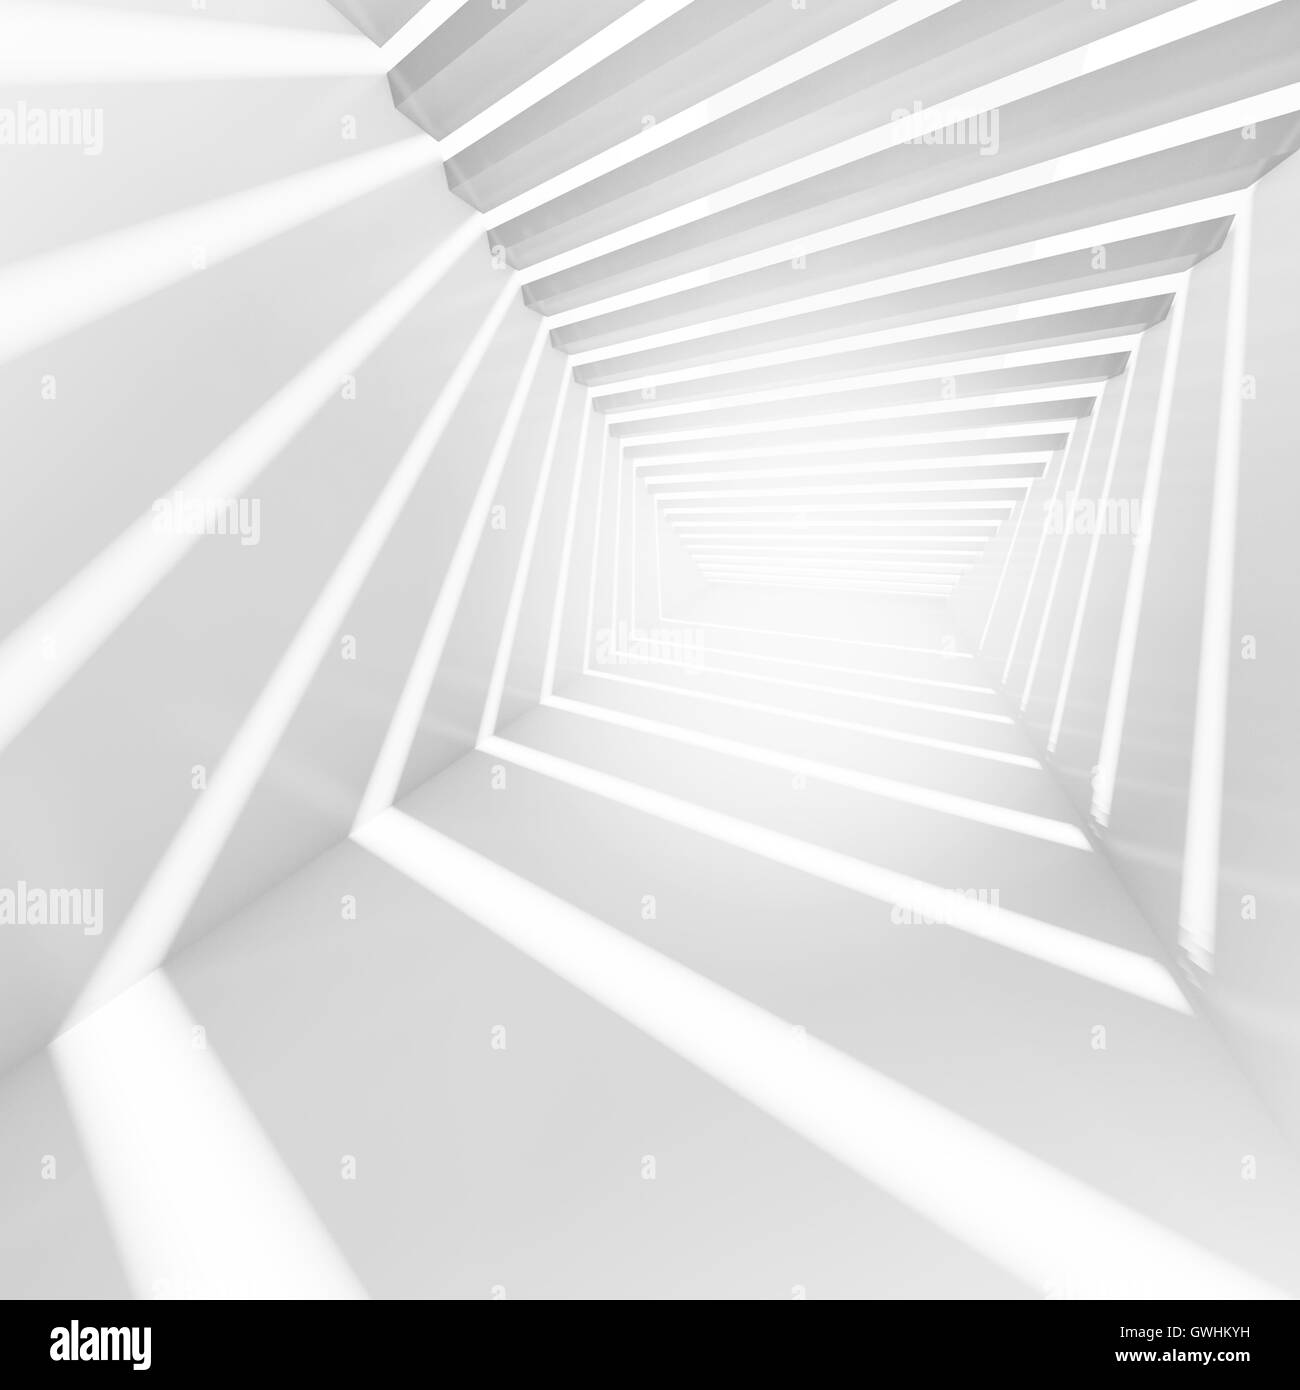 White abstract empty corridor interior with light beams. 3d illustration Stock Photo